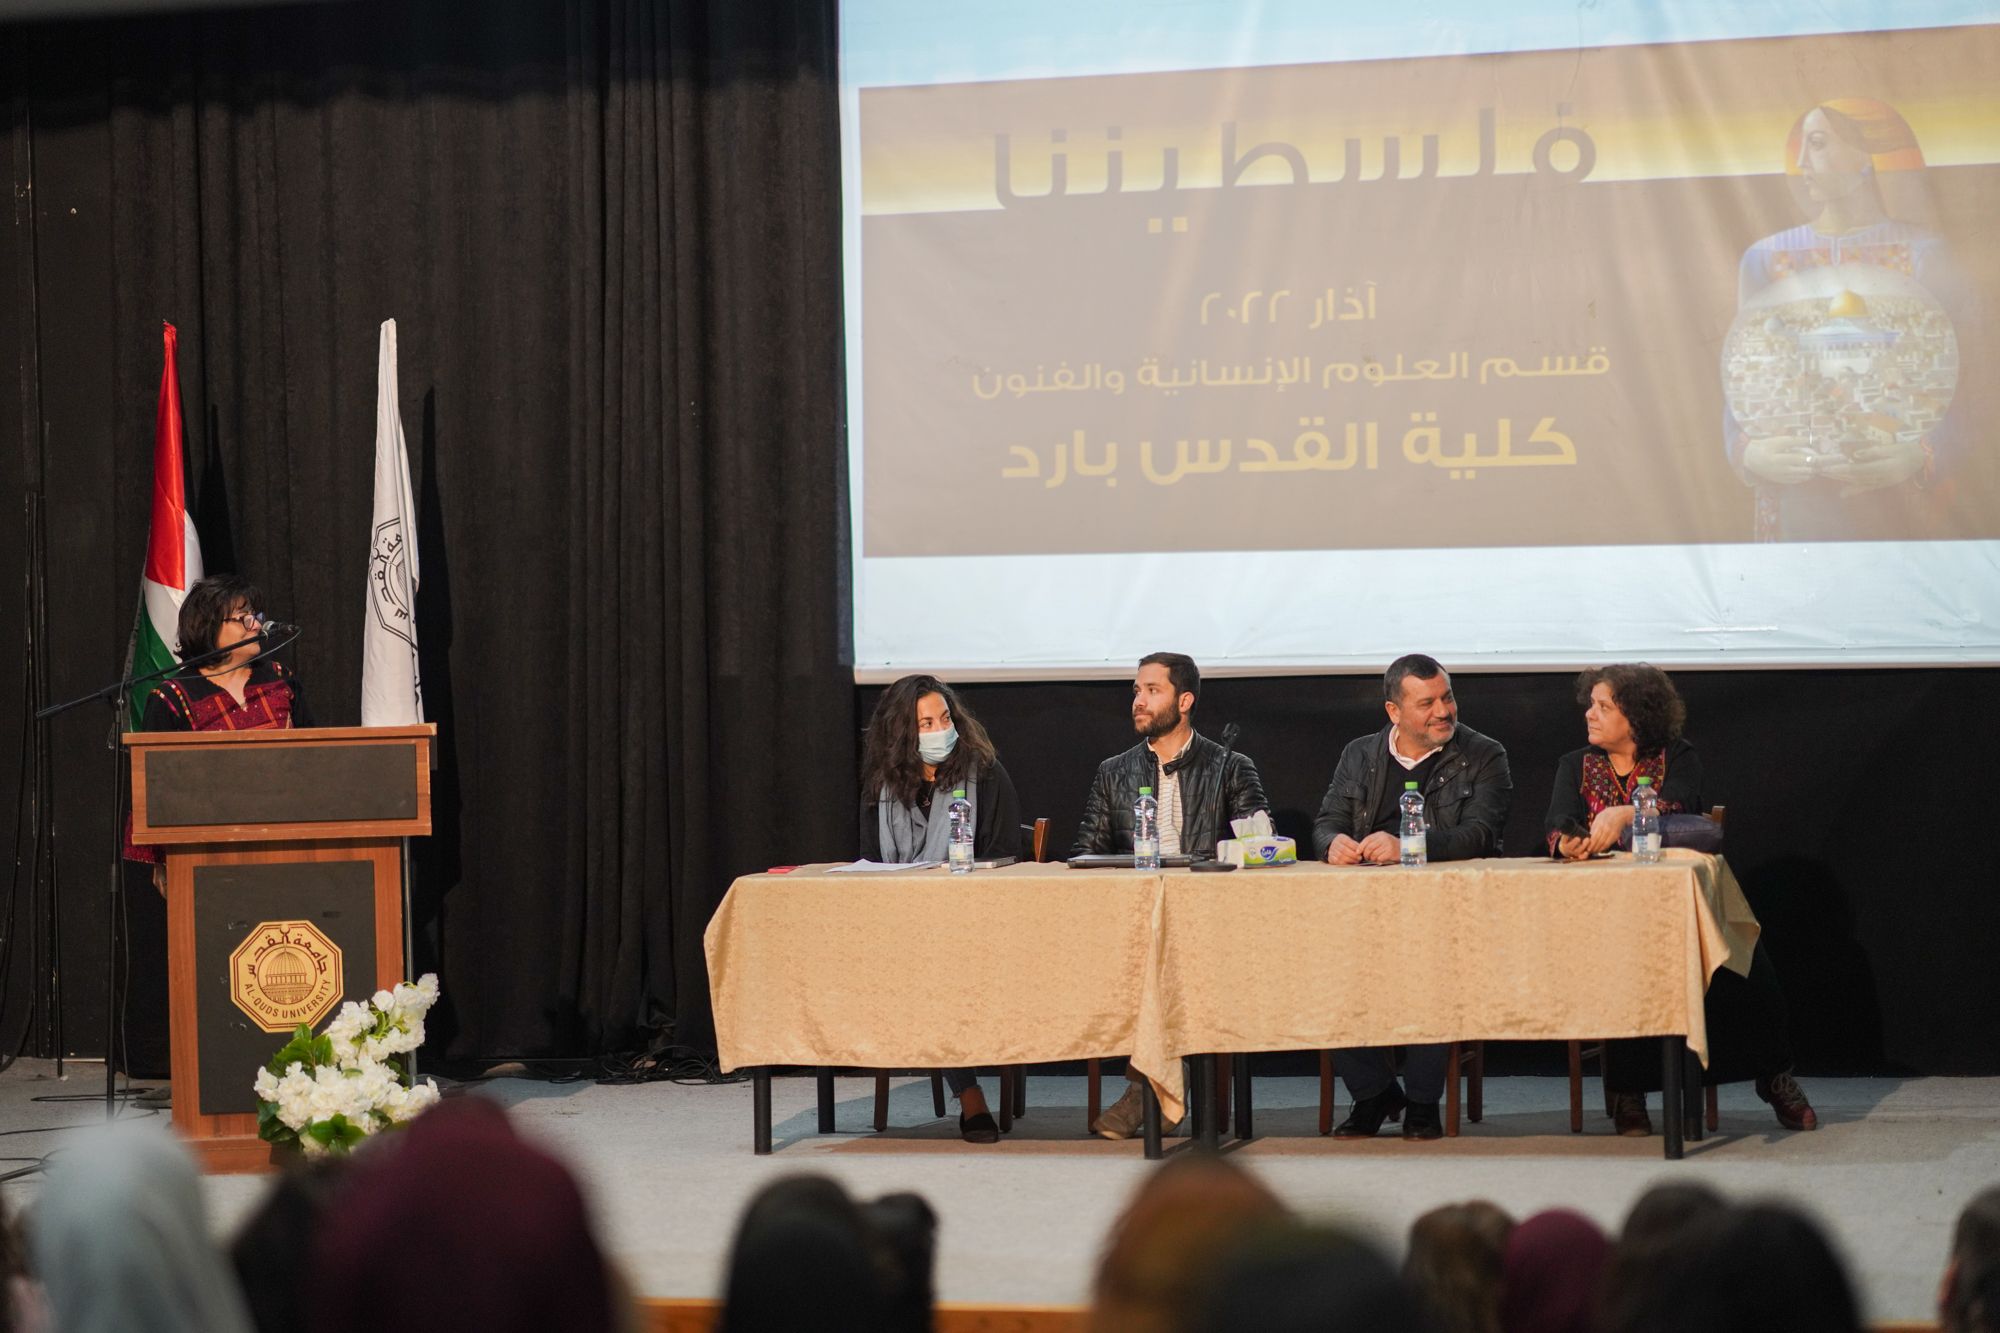 Panel seated at a table moderated by Saida Hamad at the podium.